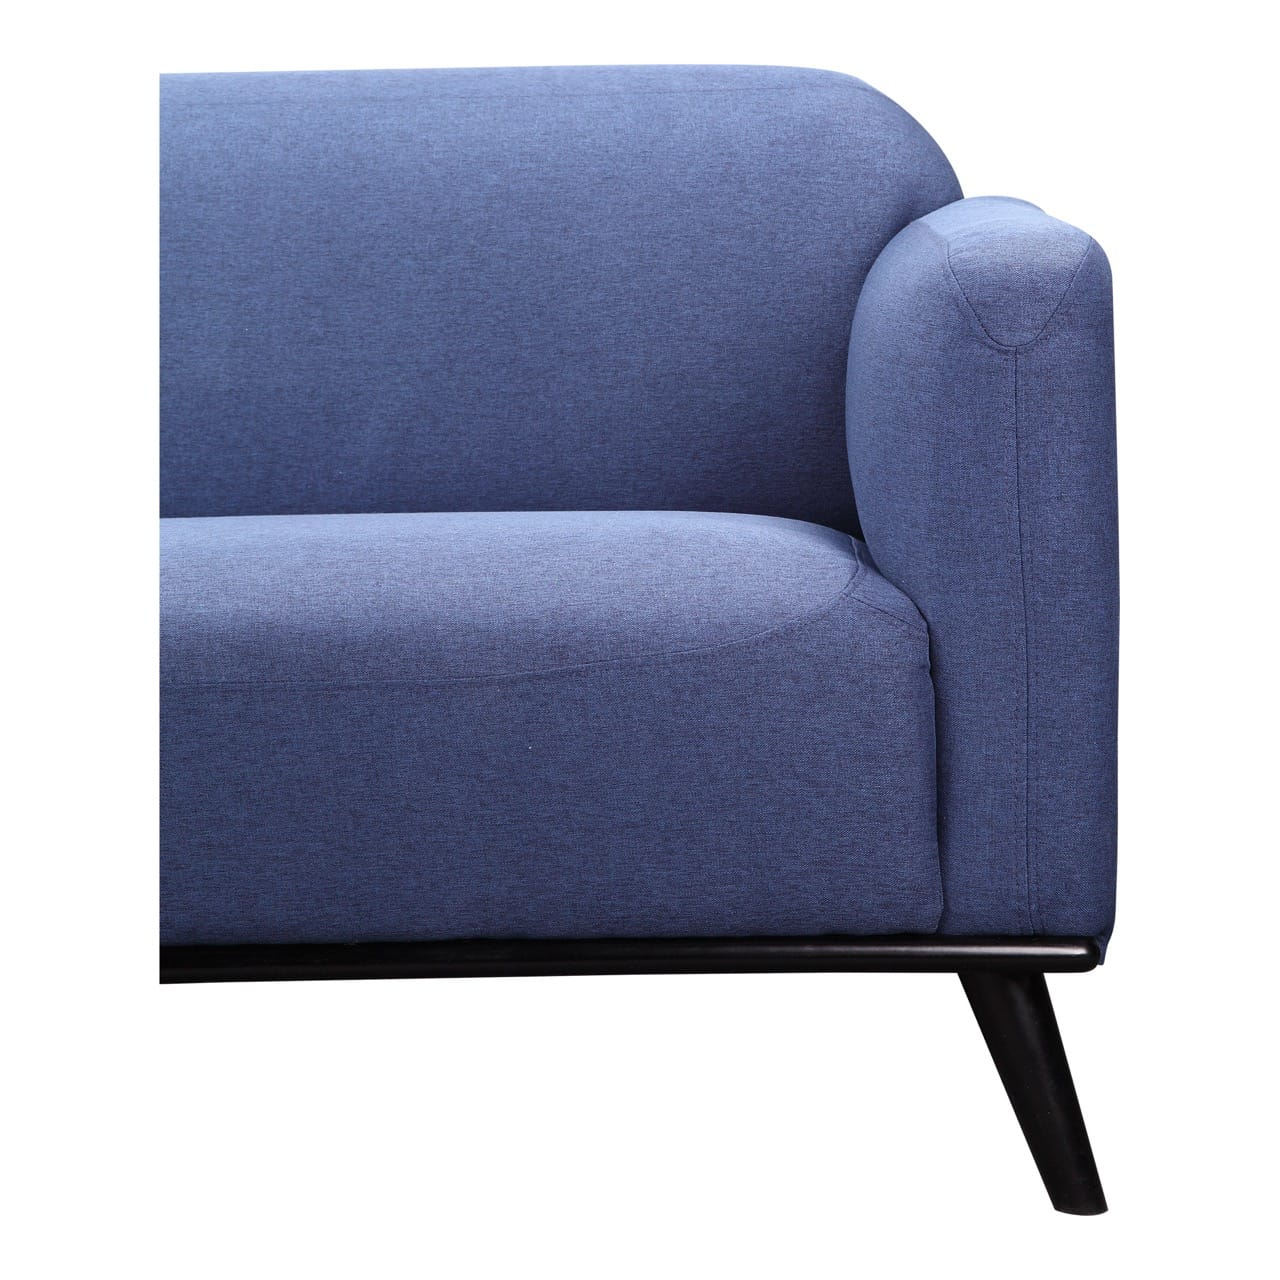 Peppy Sofa Blue By Moe S Home Collection